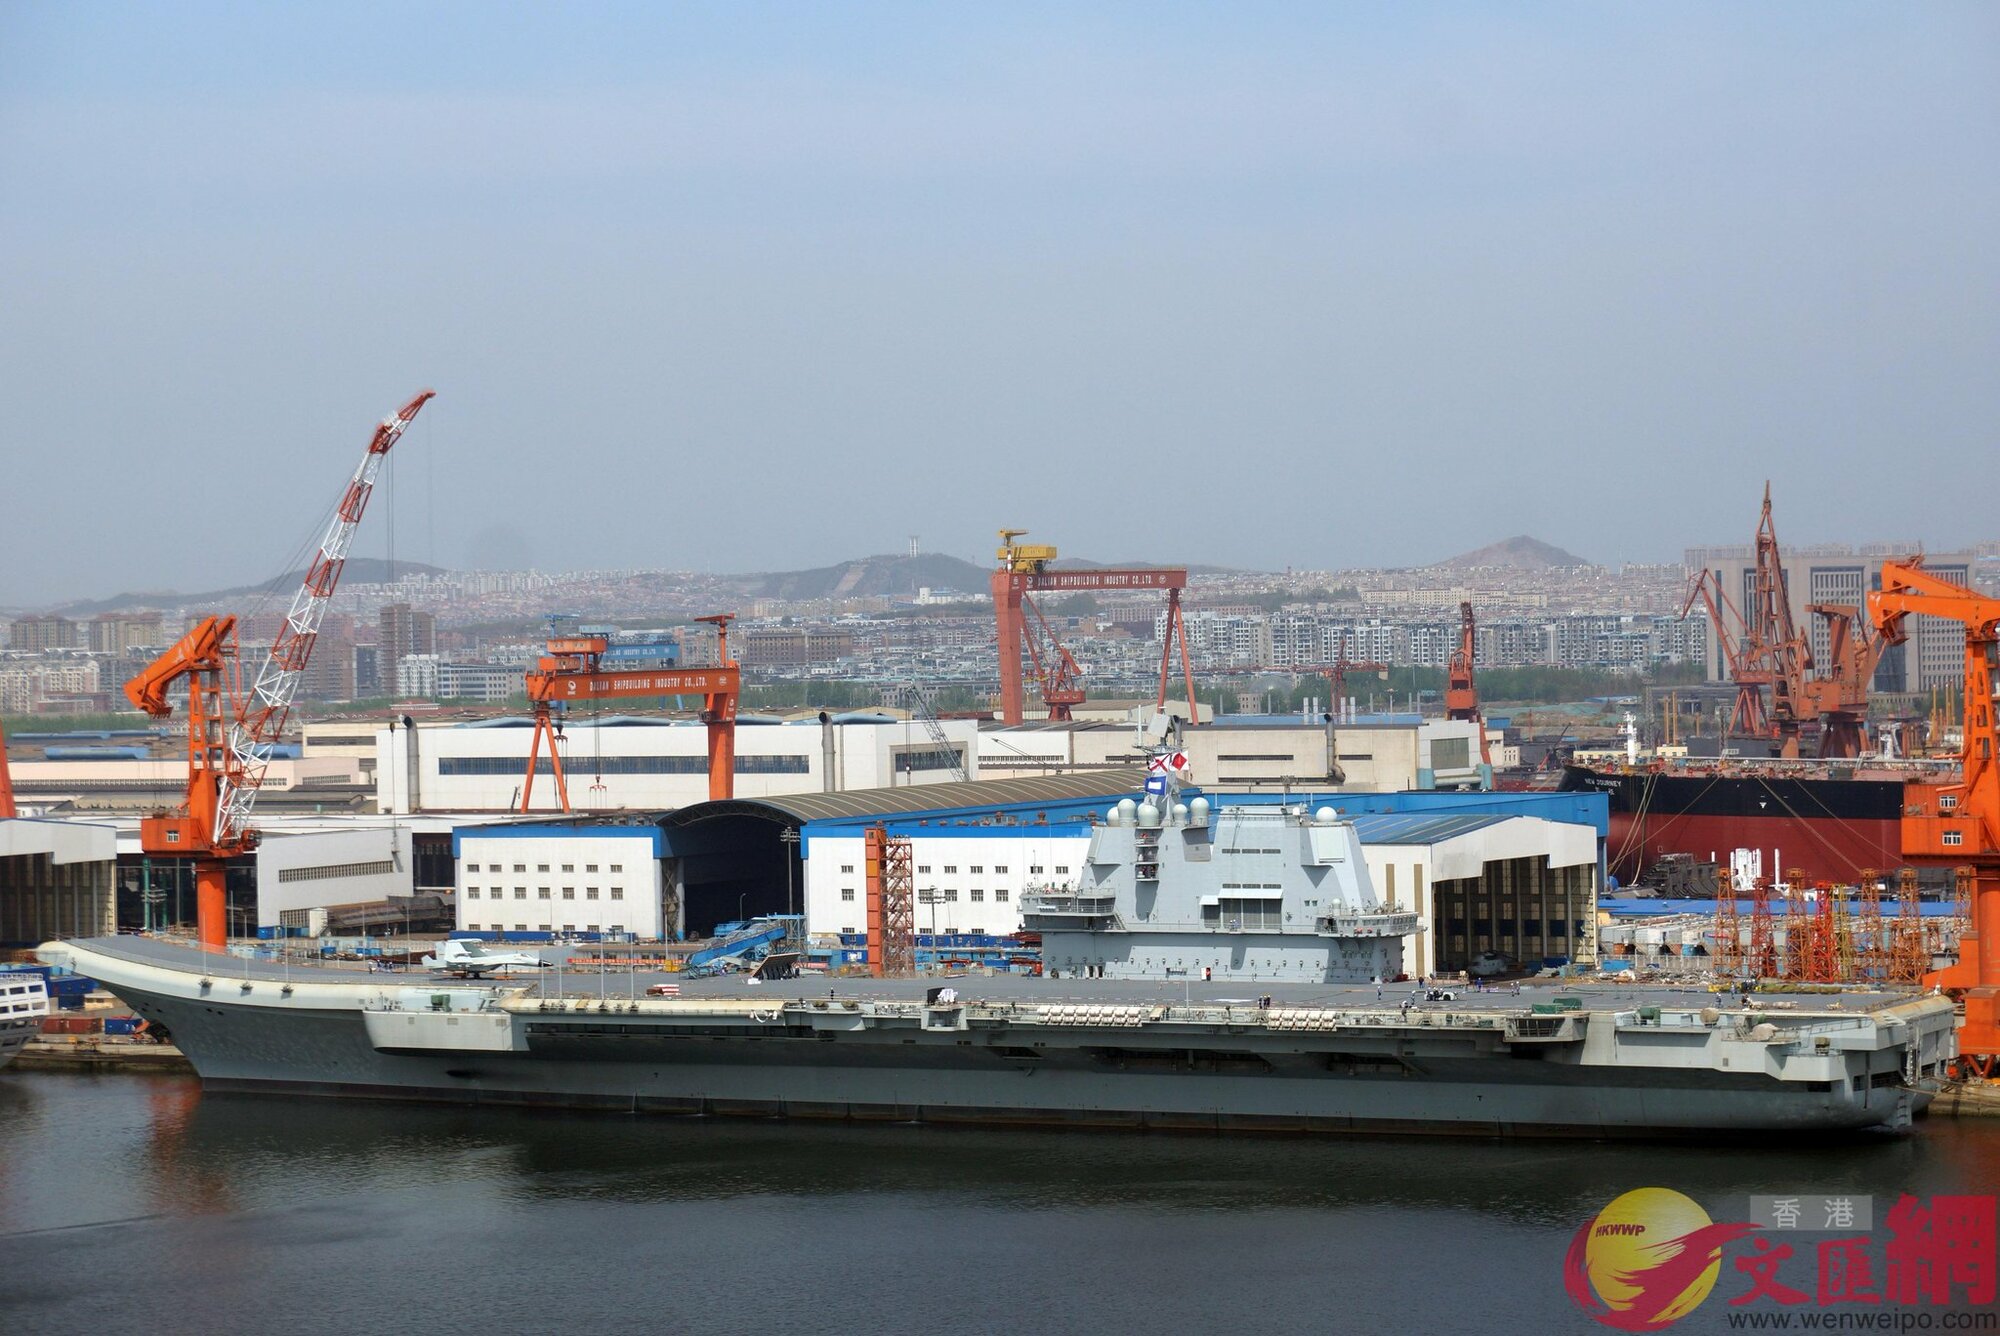 Aircraft Carrier 002 with dry dock was again flooded 20190426 01.jpeg